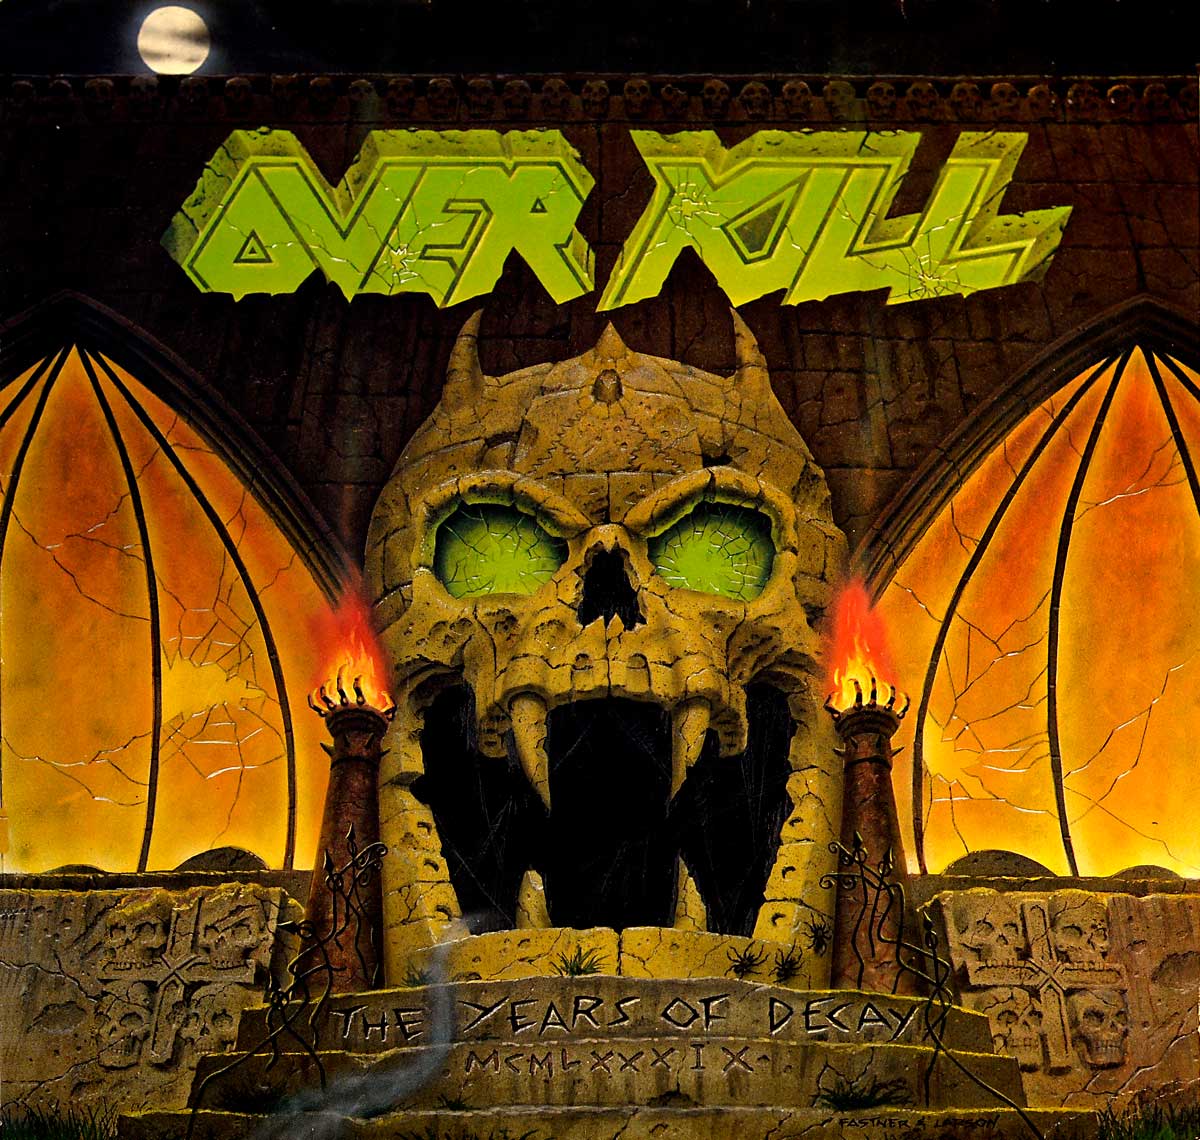 Album Front Cover Photo of OVERKILL - The Years Of Decay Megaforce Worldwide 